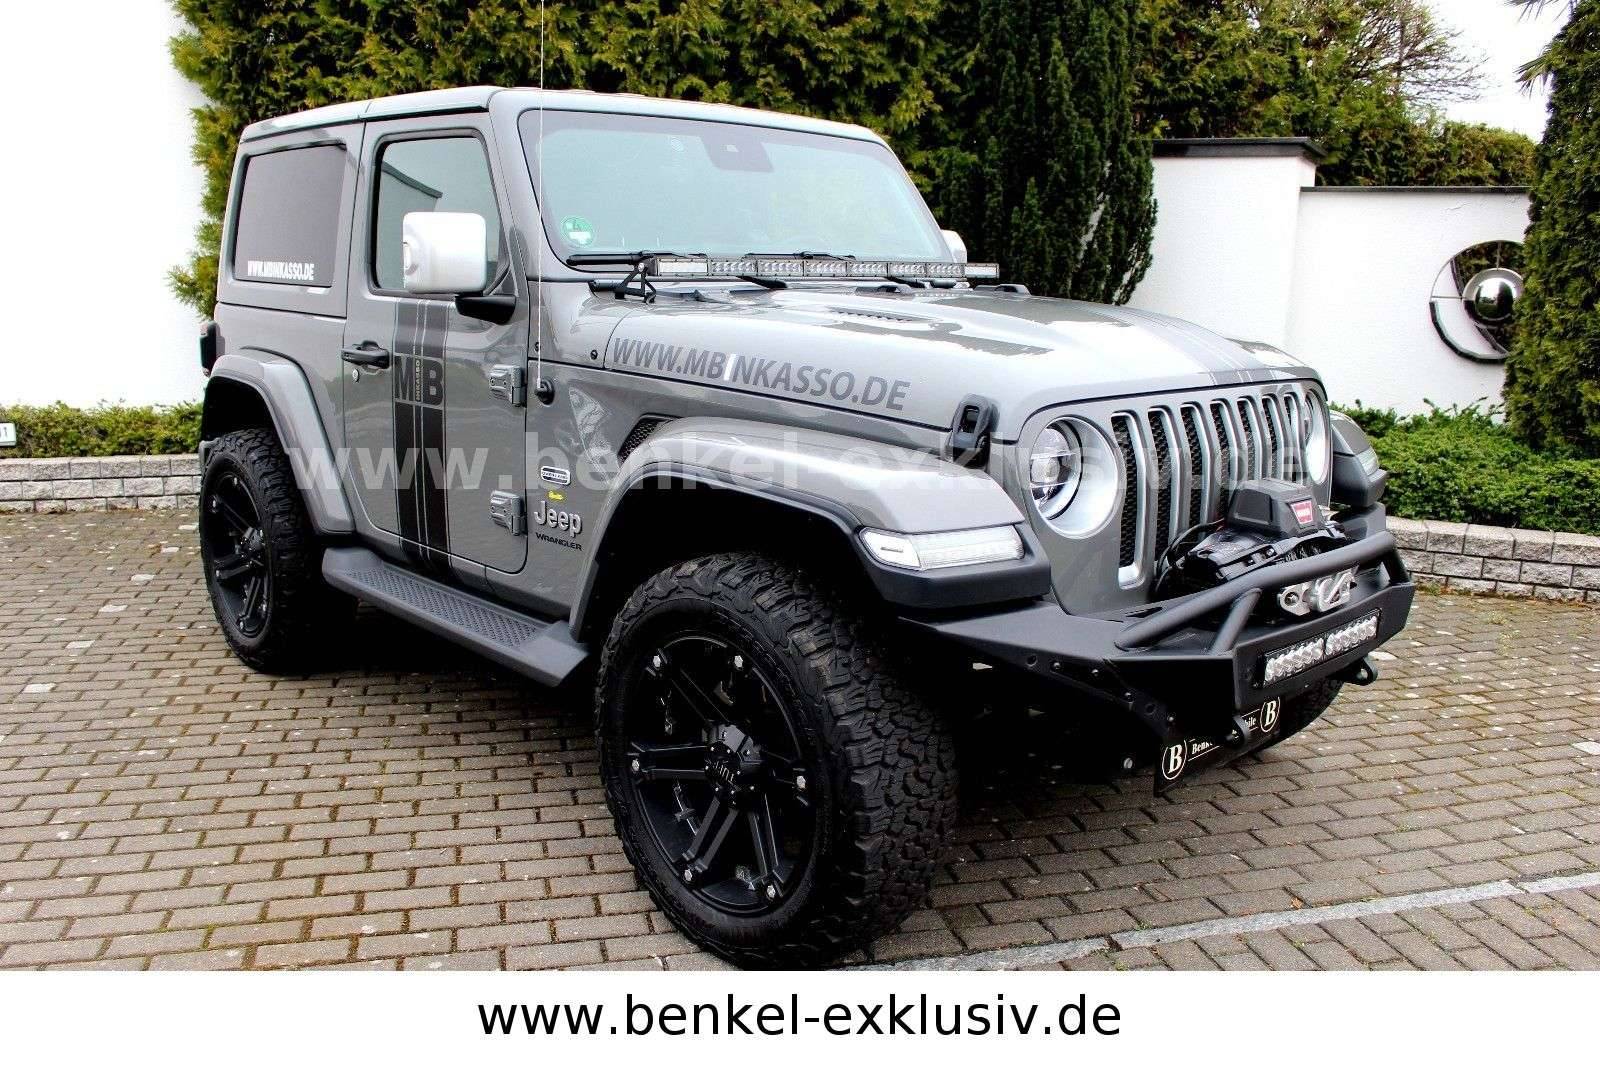 For Sale: Jeep Wrangler 2.2D Rubicon (2020) offered for €69,950